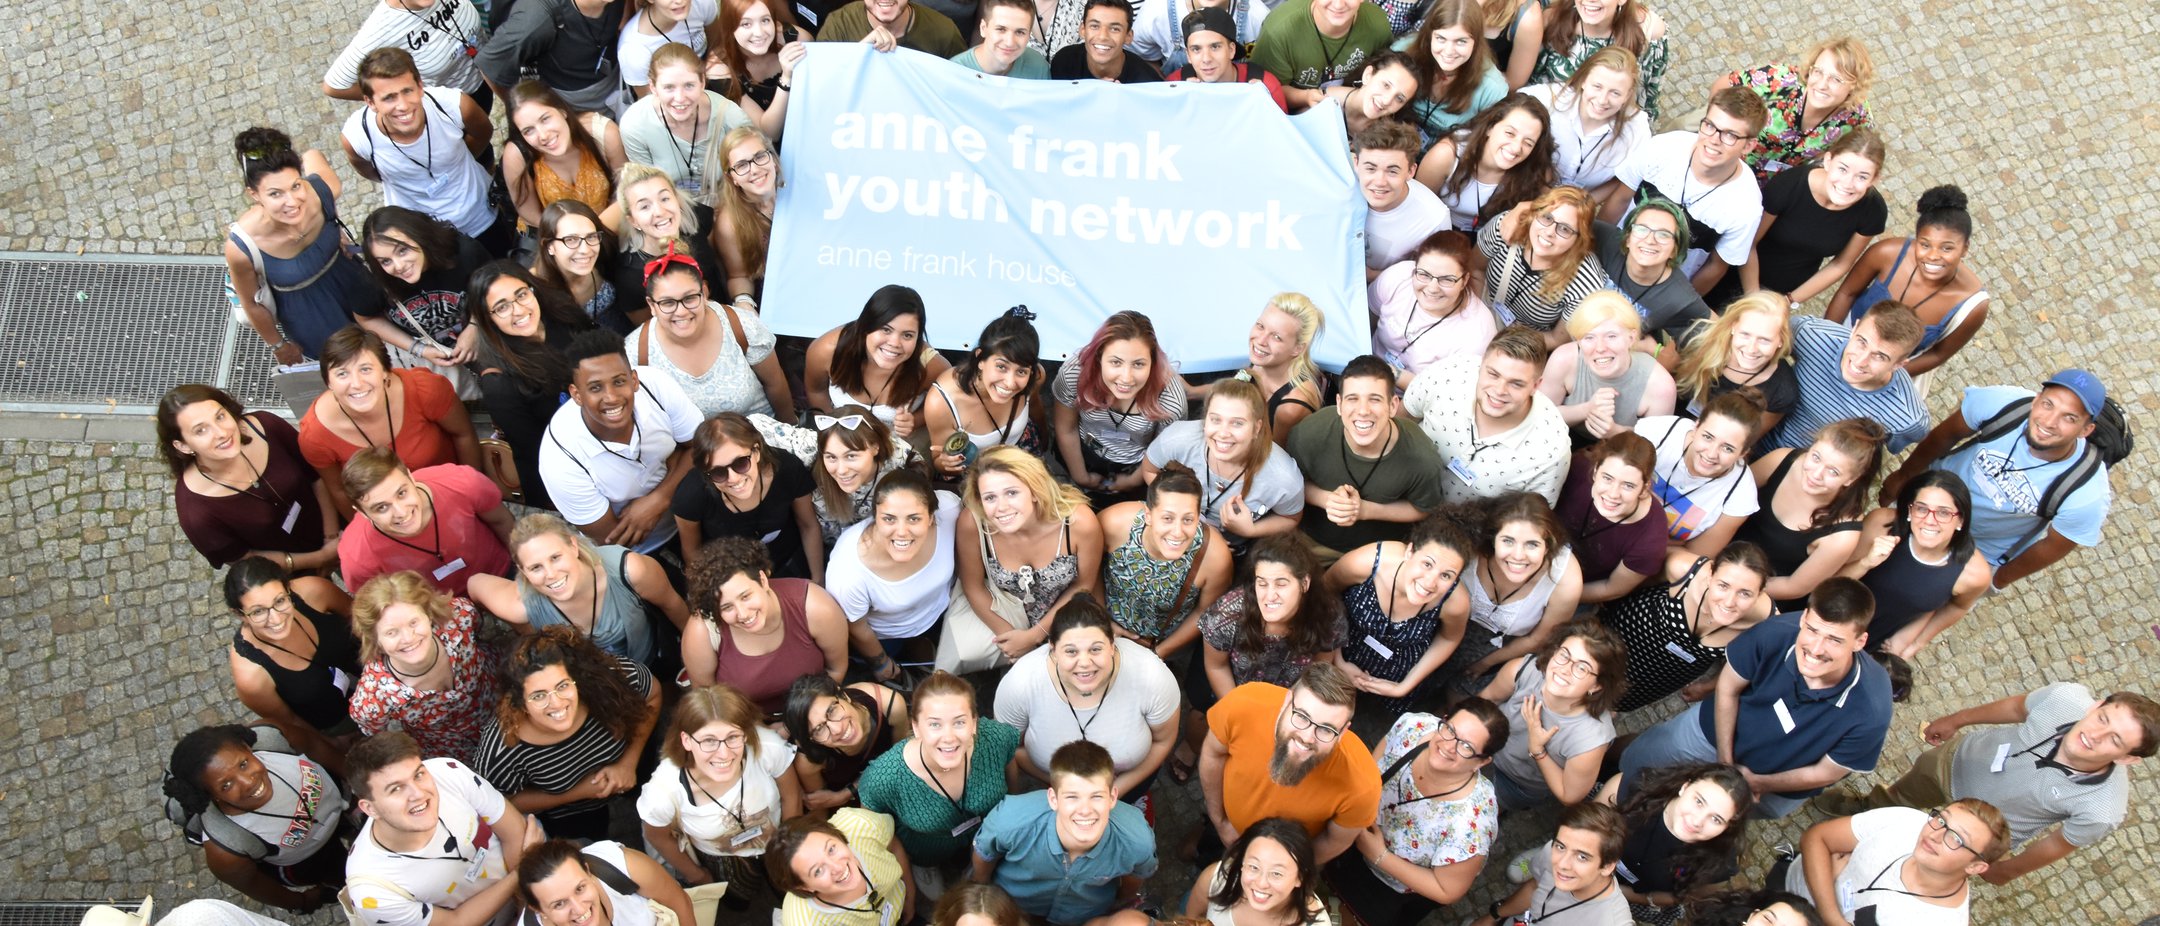 Anne Frank Youth Network